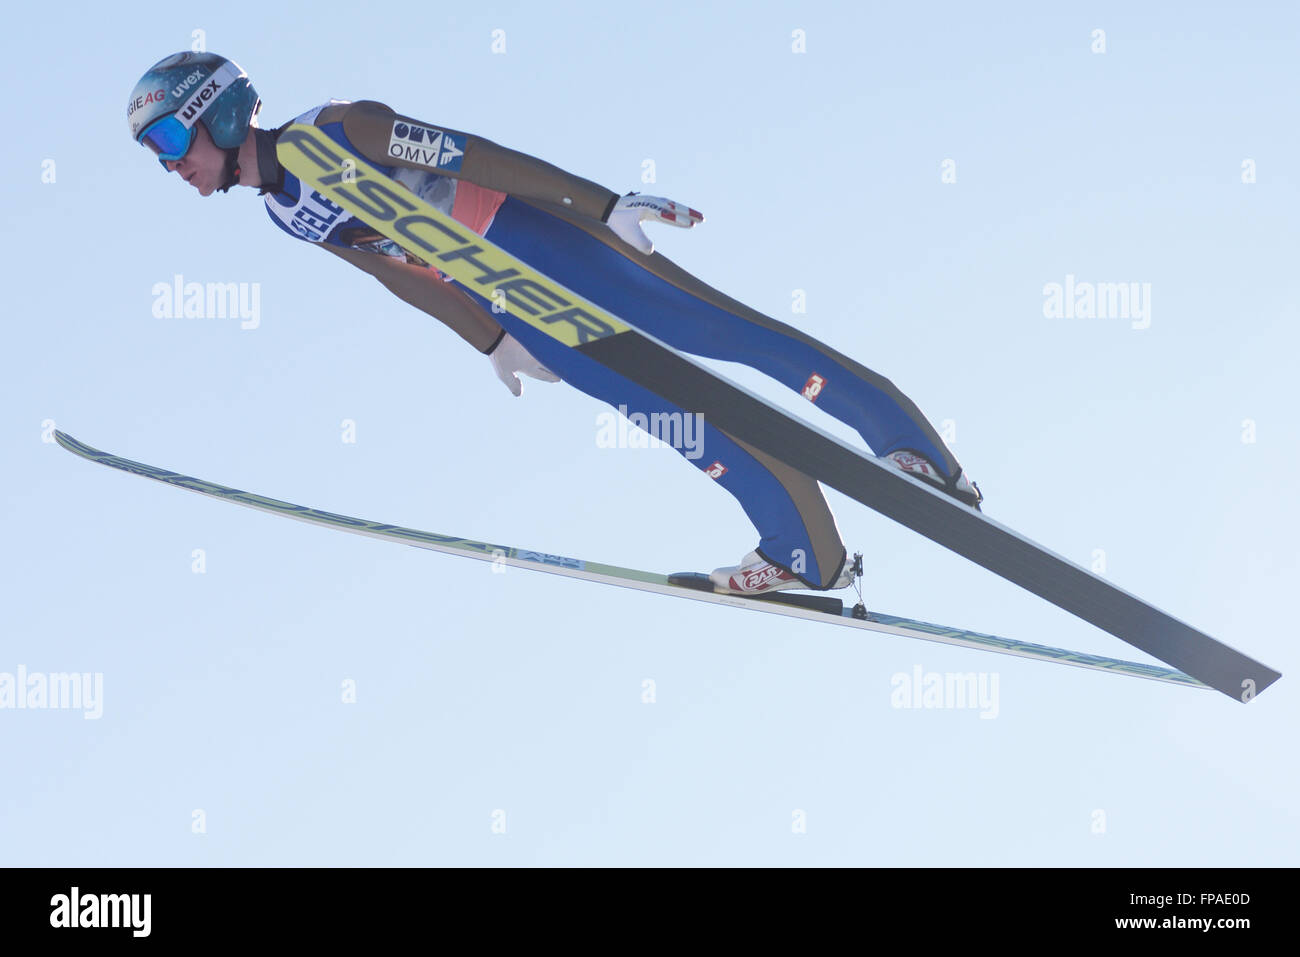 Planica, Slovenia. 18th Mar, 2016. Michael Hayboeck of Austria competes during Planica FIS Ski Jumping World Cup final on the March 18, 2016 in Planica, Slovenia. © Rok Rakun/Pacific Press/Alamy Live News Stock Photo